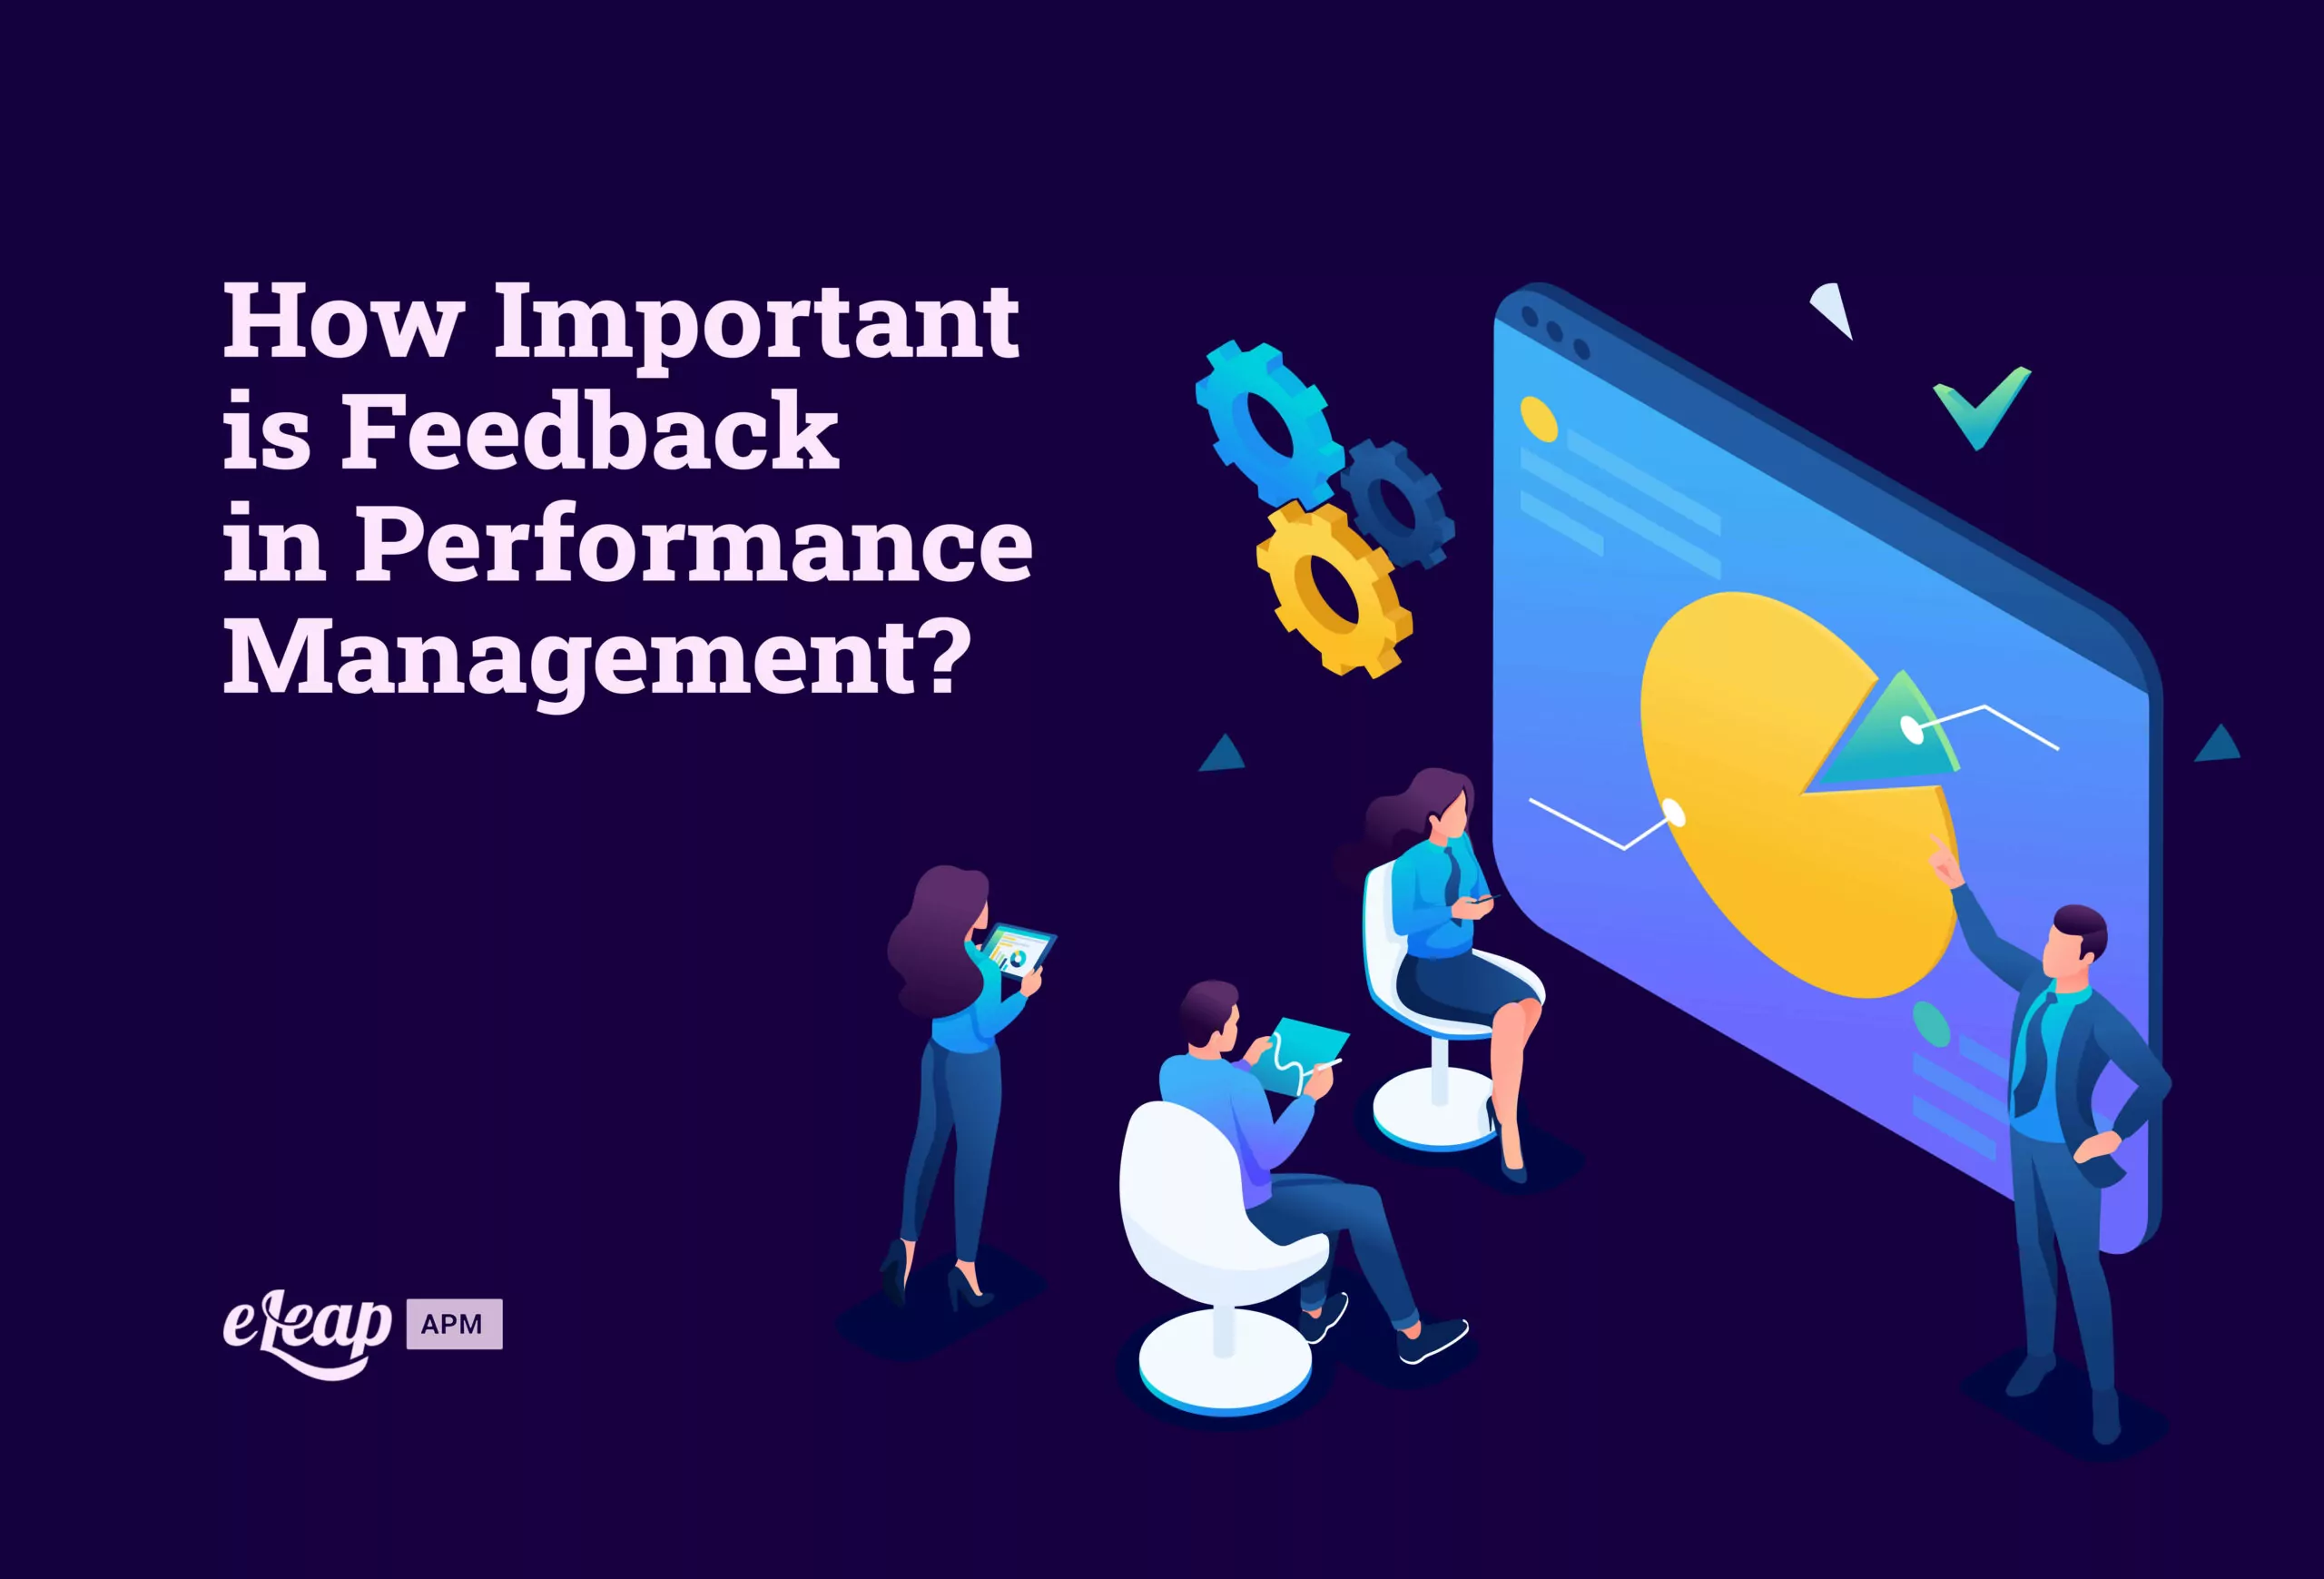 How Important is Feedback in Performance Management?